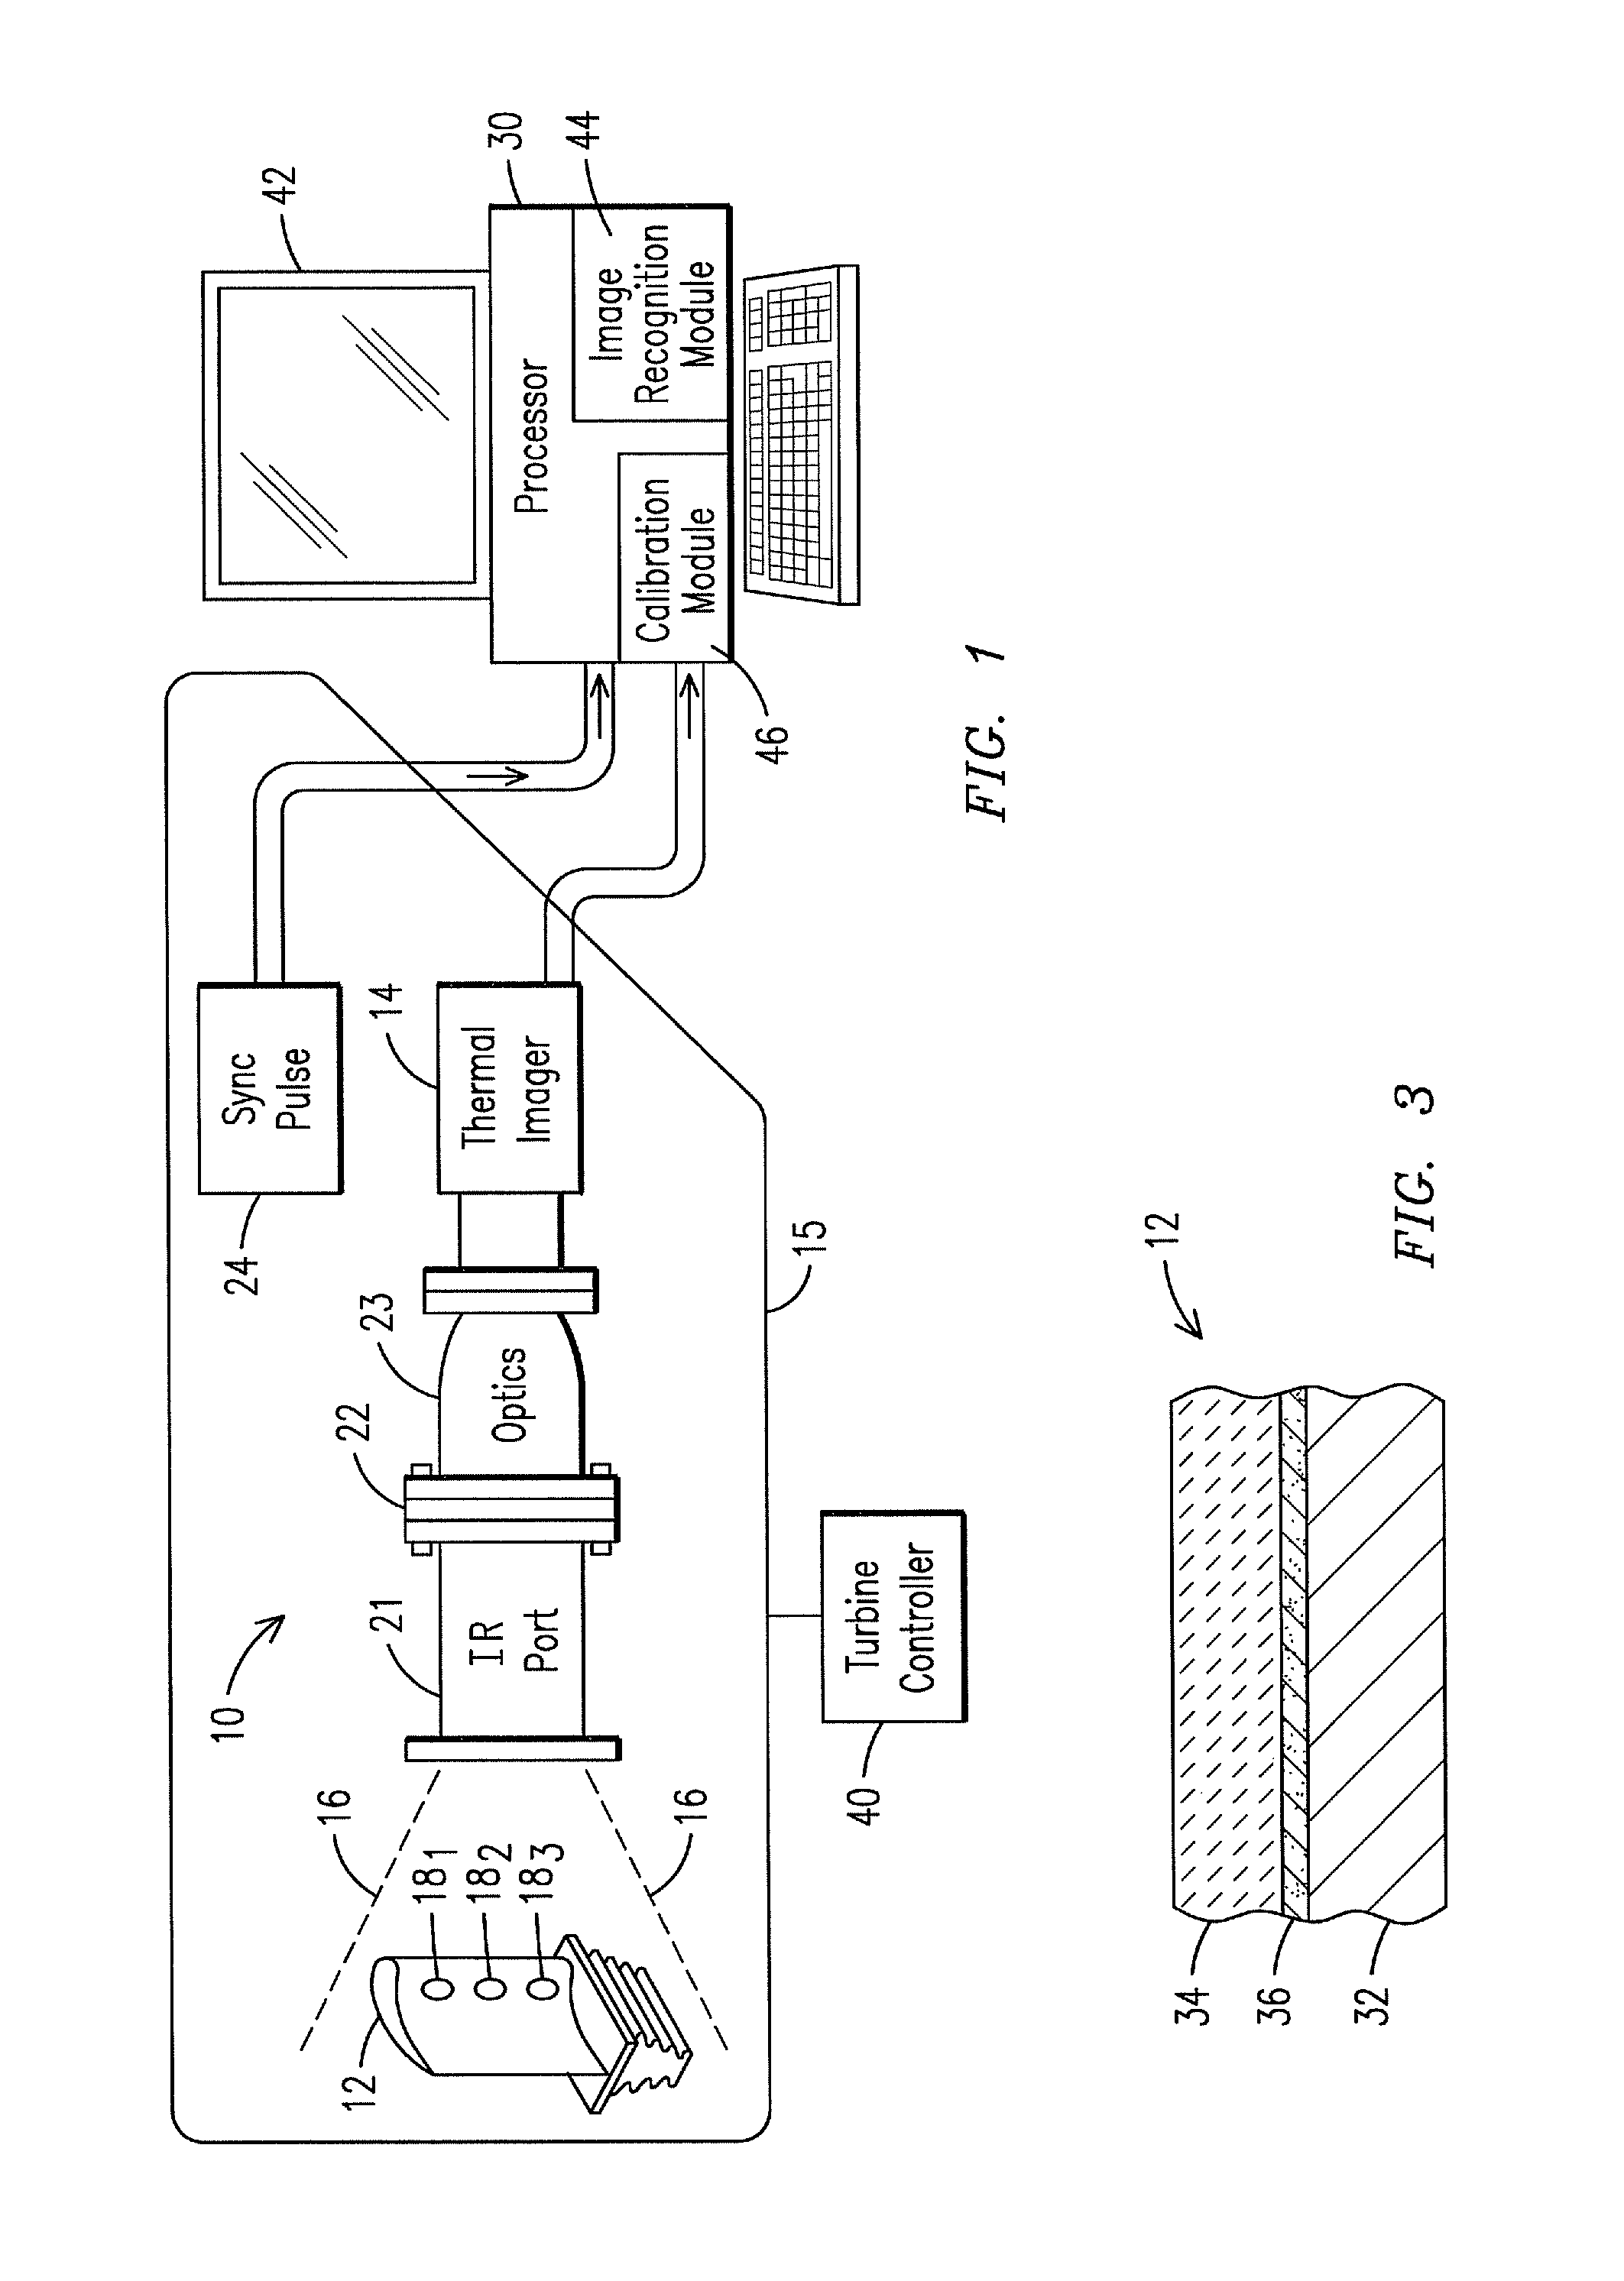 Apparatus and method for temperature mapping a turbine component in a high temperature combustion environment